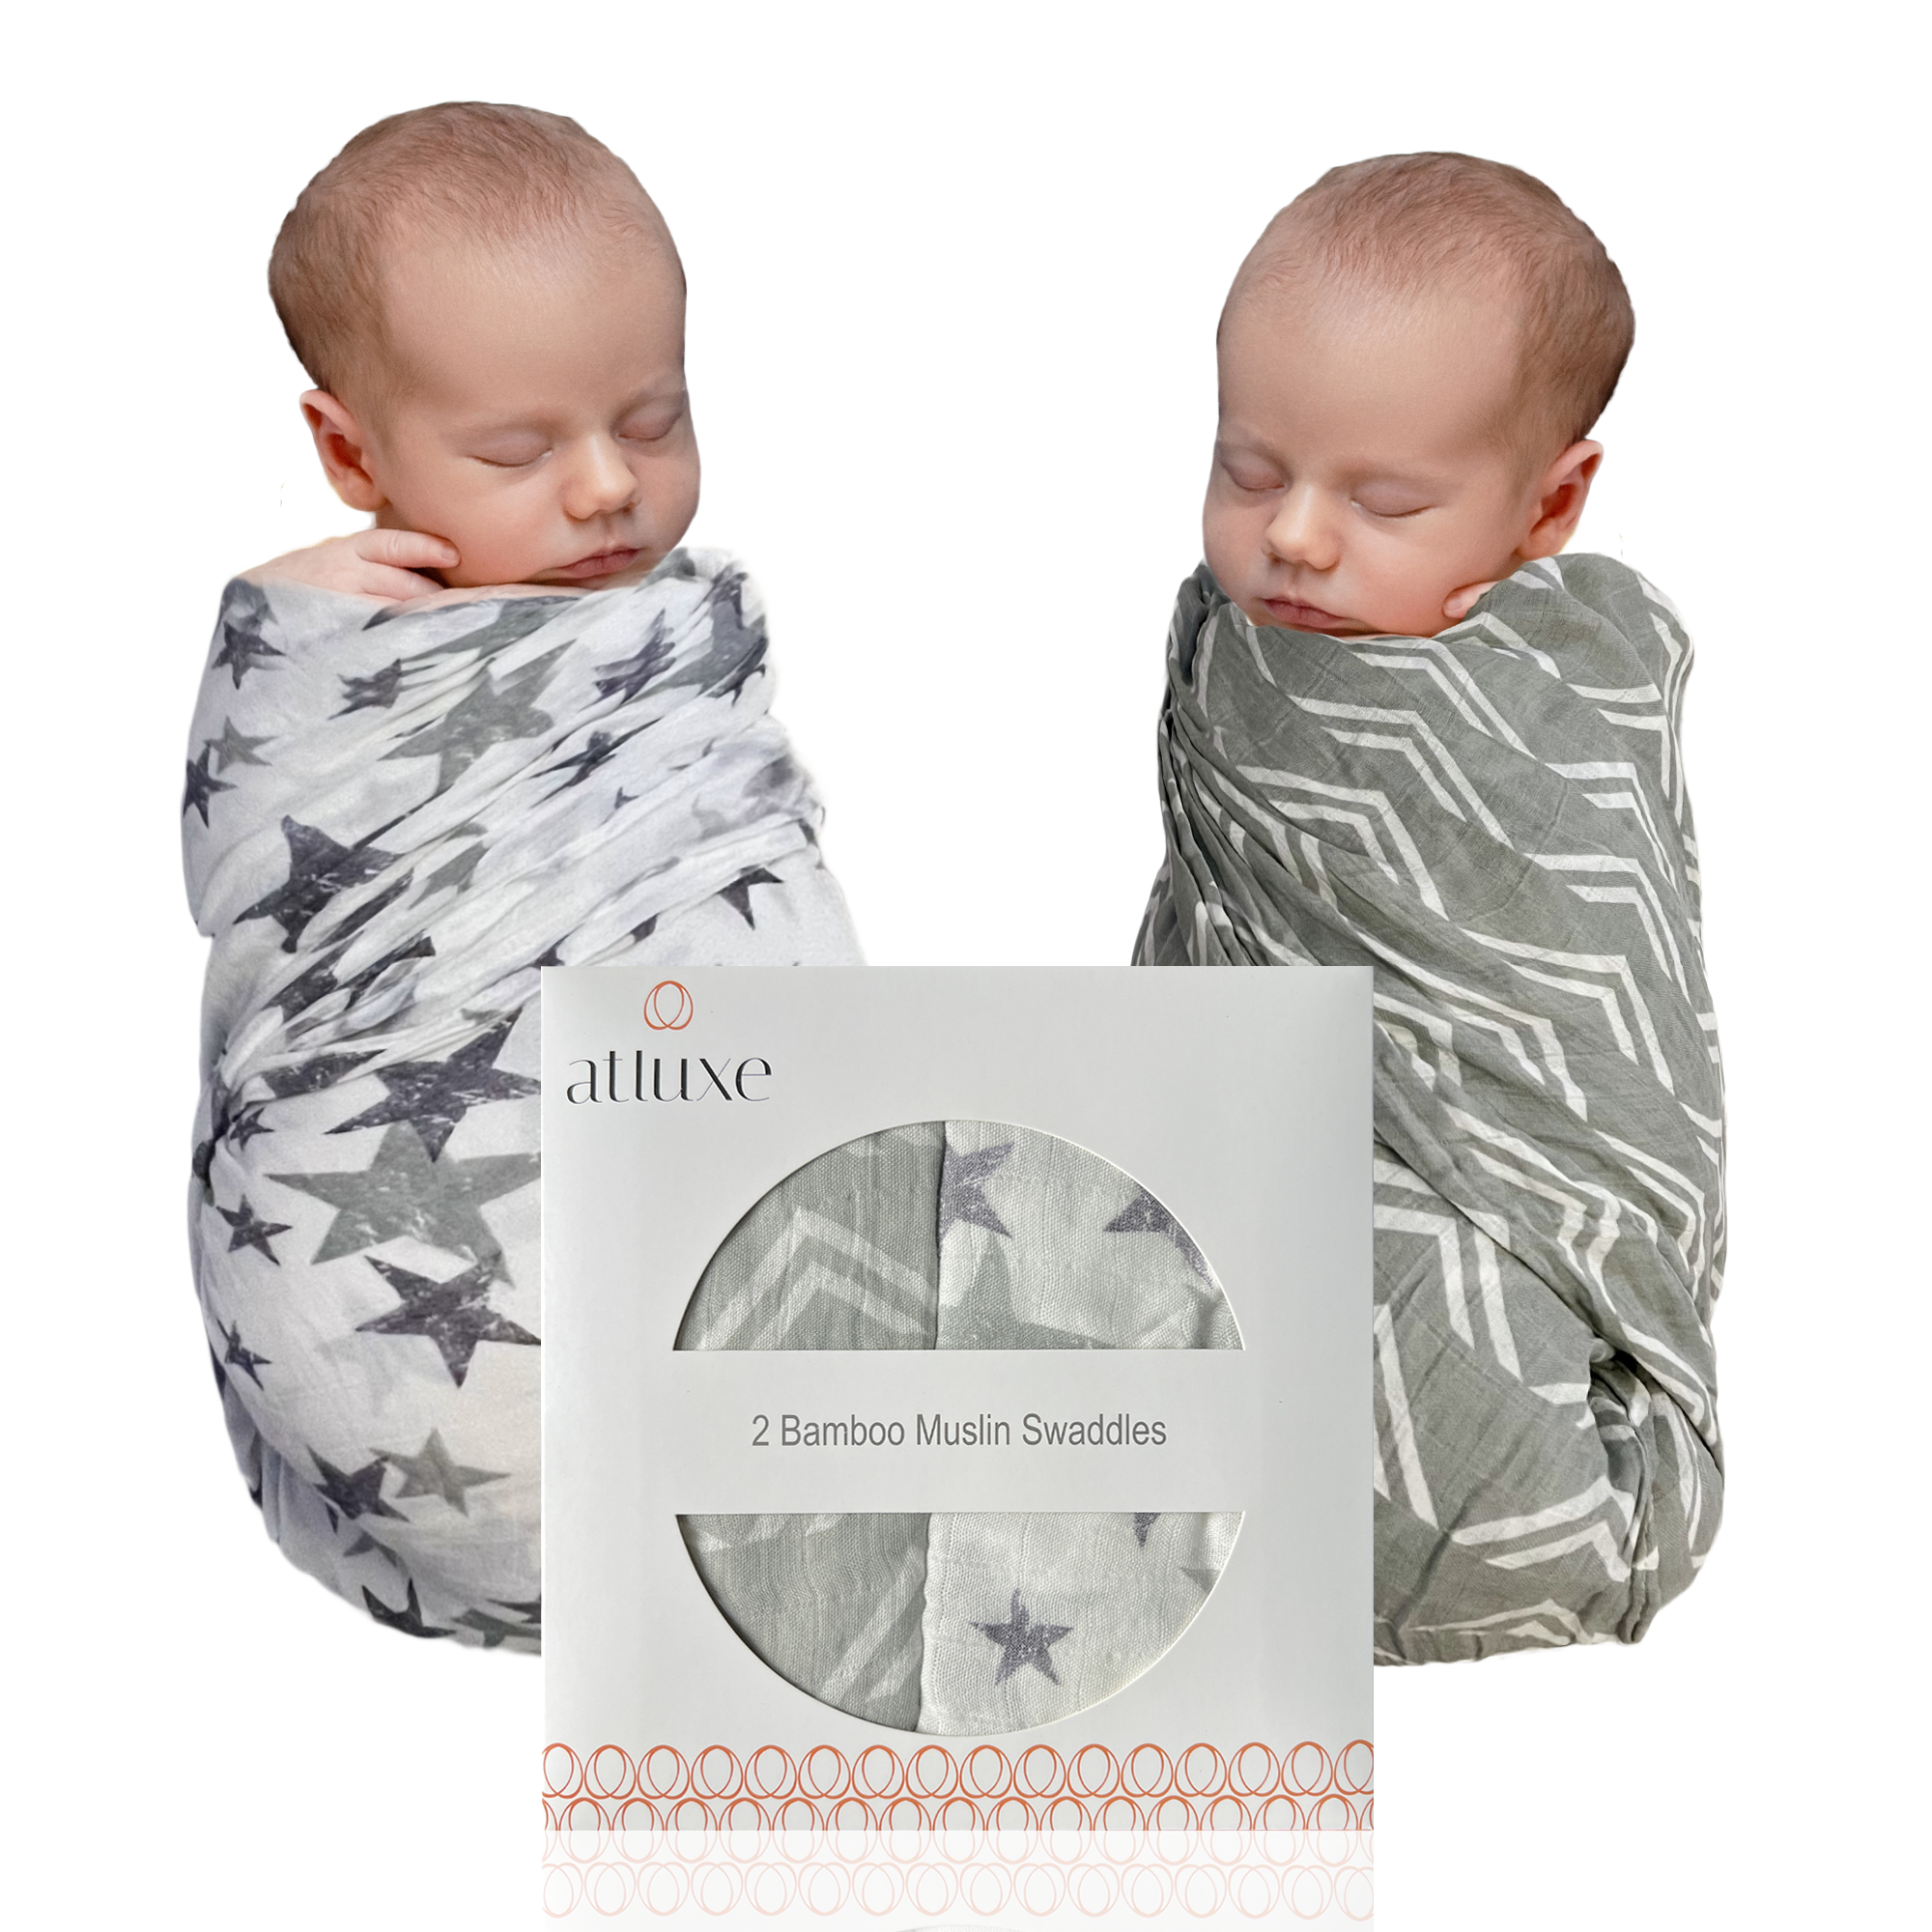 Receiving baby blankets. Babies wrapped in gray Atluxe blankets 